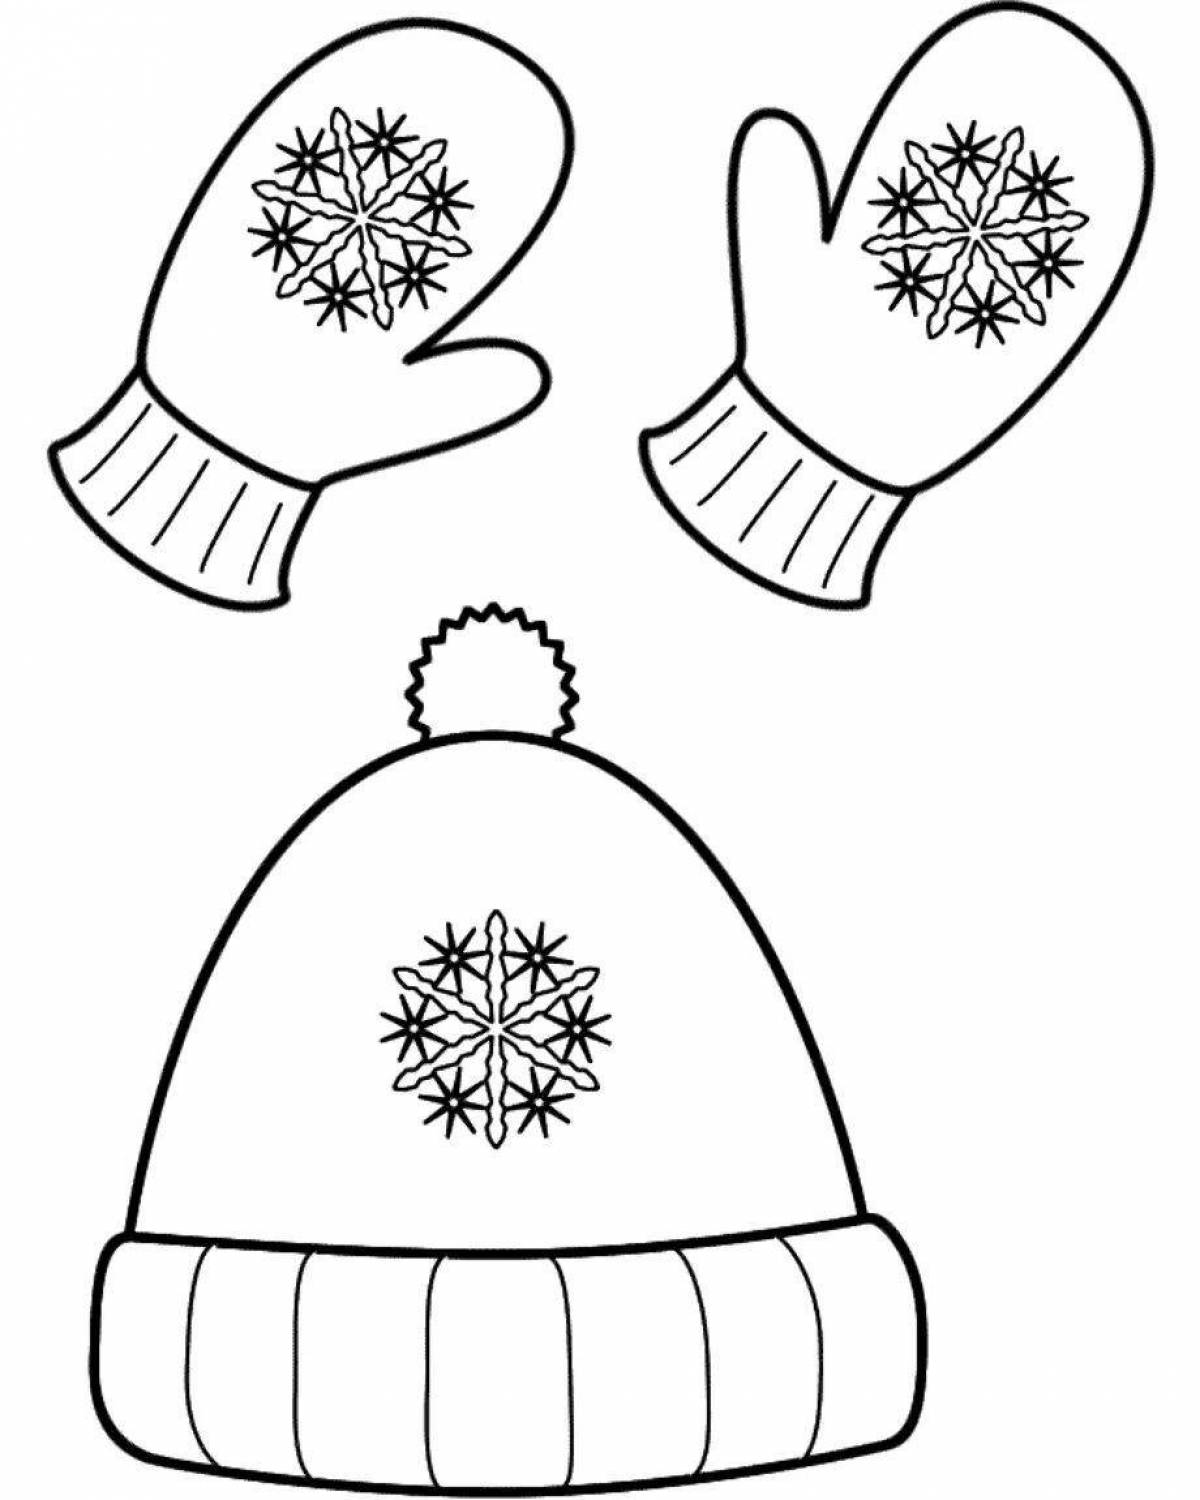 Fuzzy coloring children's winter clothes